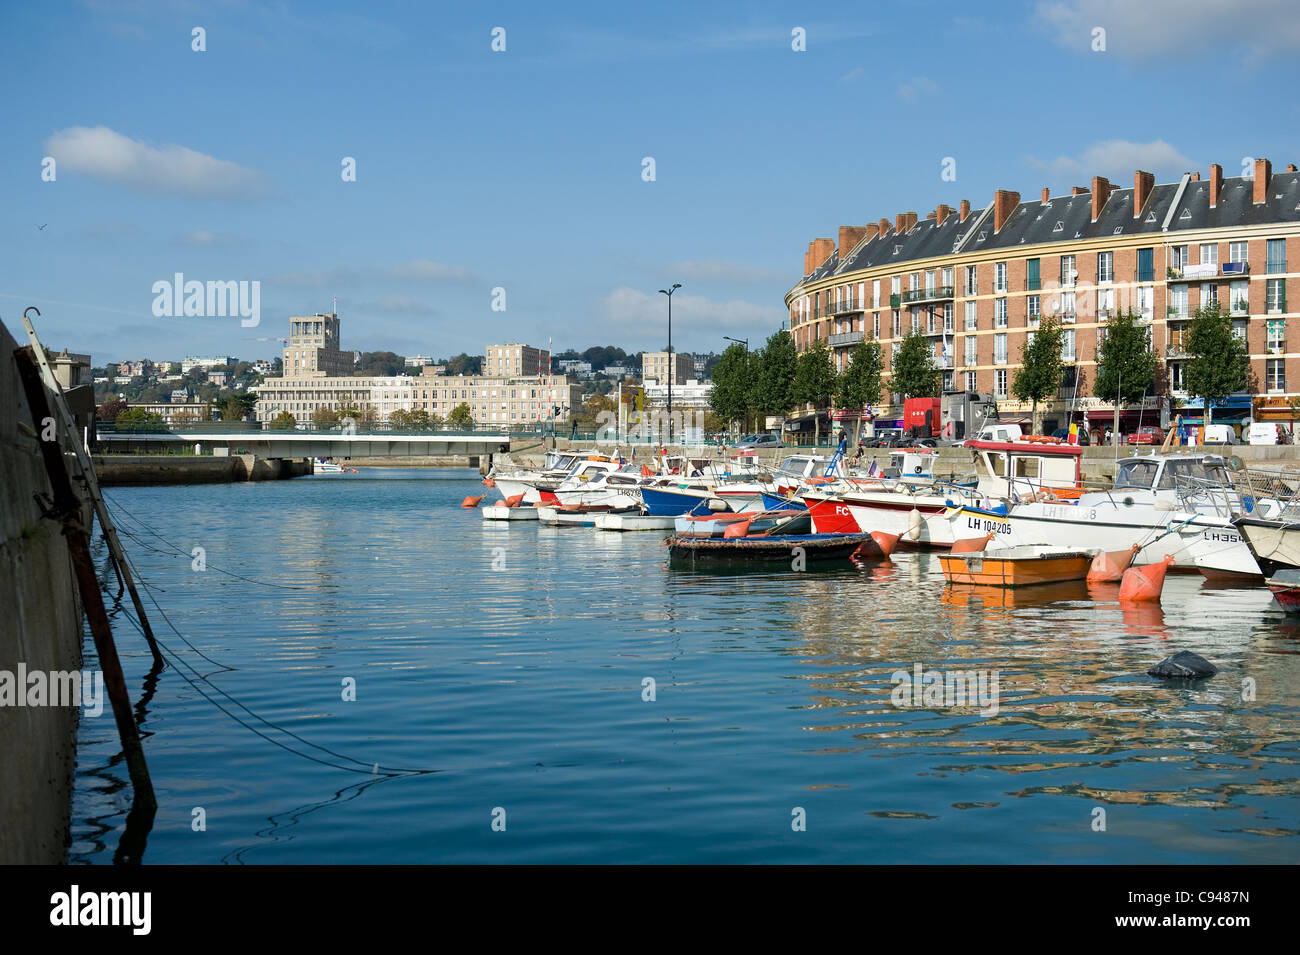 Fishing boats and motor yachts in the bassin du roi, oldest harbour of Le Havre, UNESCO world heritage city in Normandy, France Stock Photo